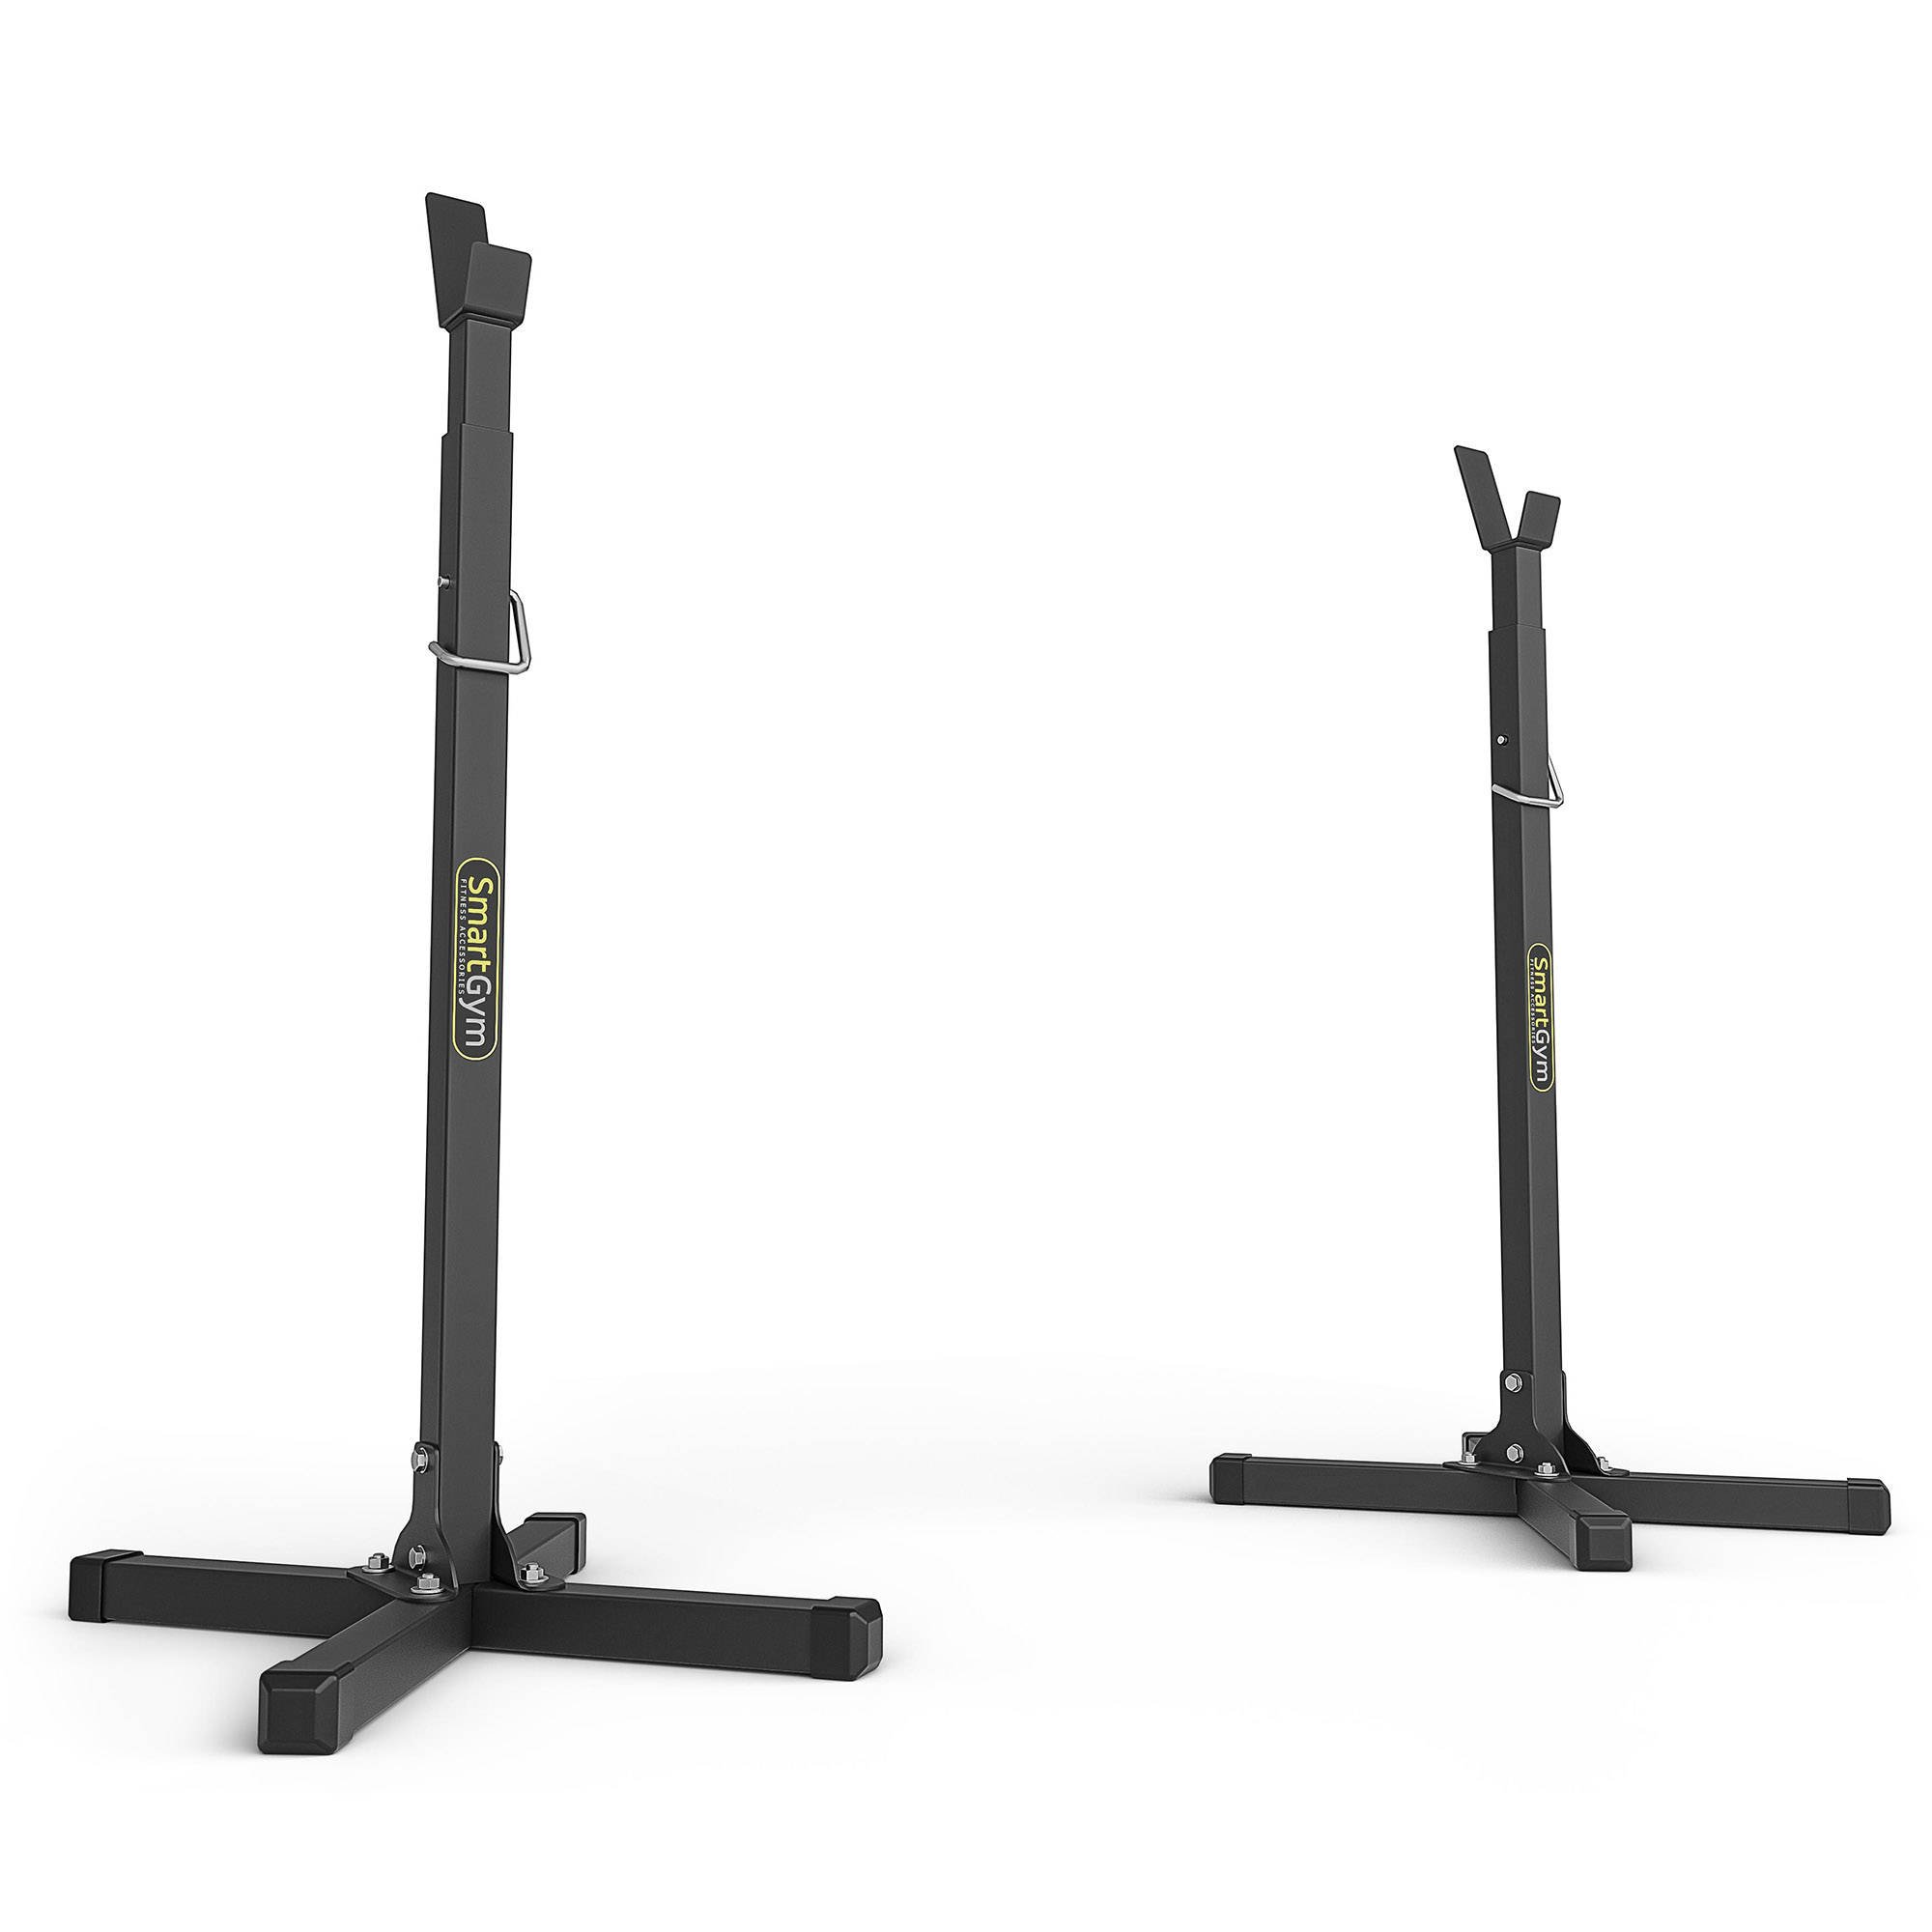 Adjustable bench SG-11 - SmartGym Fitness Accessories